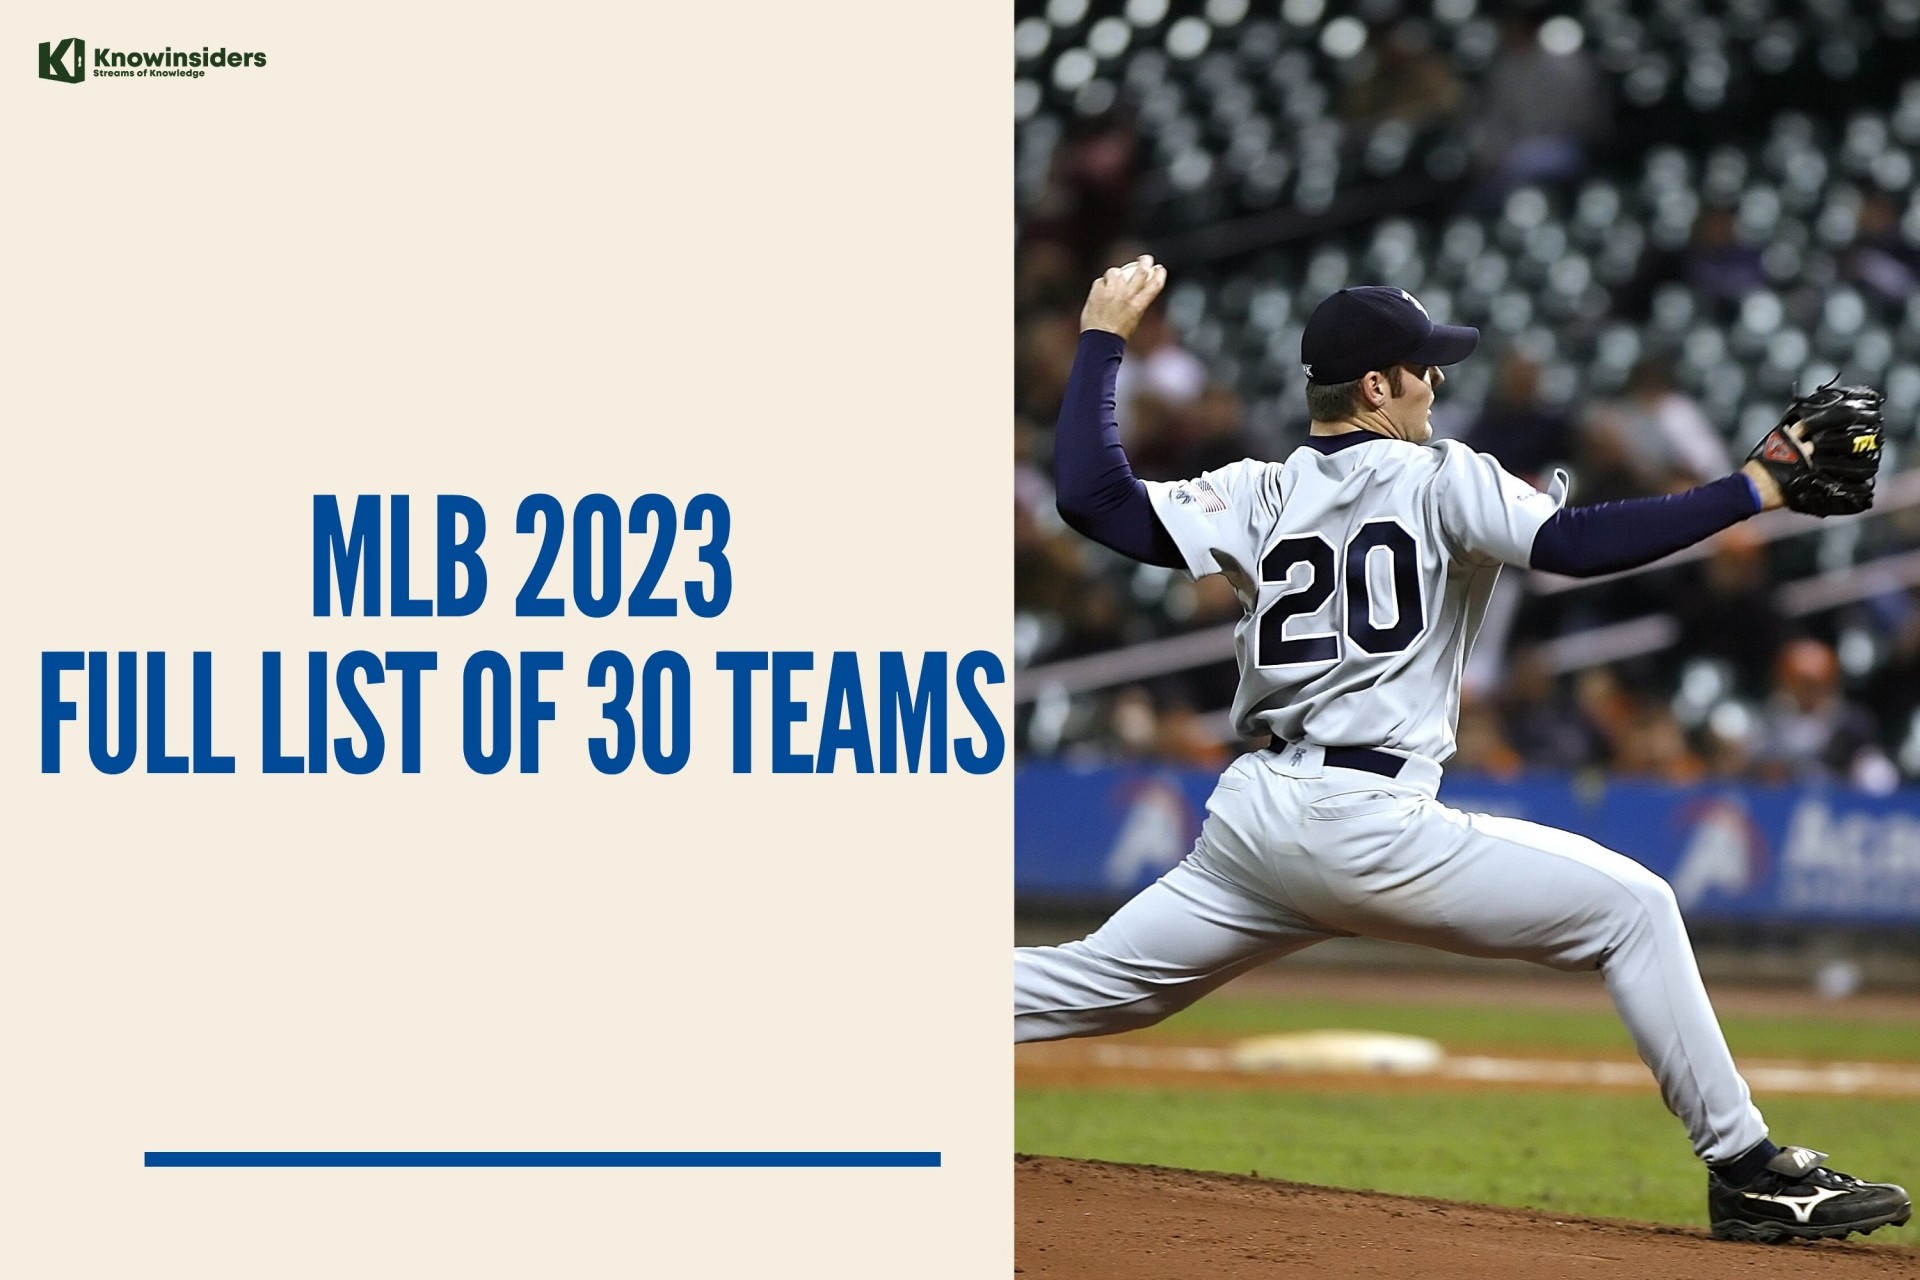 MLB 2023: List of 30 Teams, Team News, Projected Lineups and Ranking